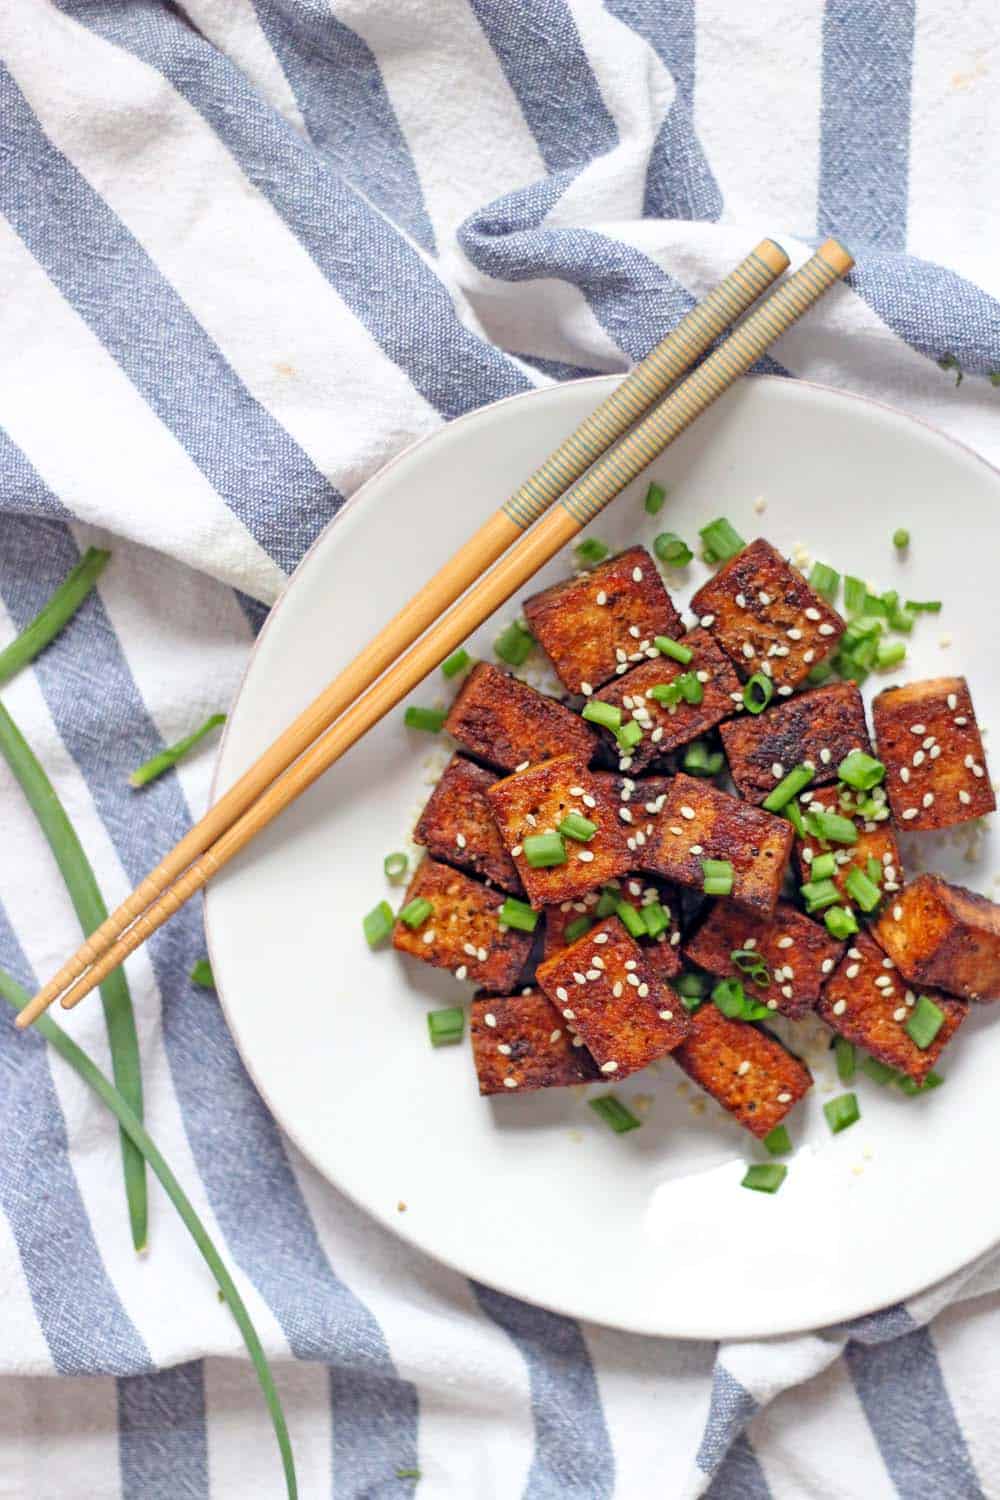 Pan Seared Soy Sauce and Black Pepper Tofu | This is the best and easiest way to prepare tofu that's crispy, simply flavored and salty, and goes with pretty much anything! No breading or deep frying required.